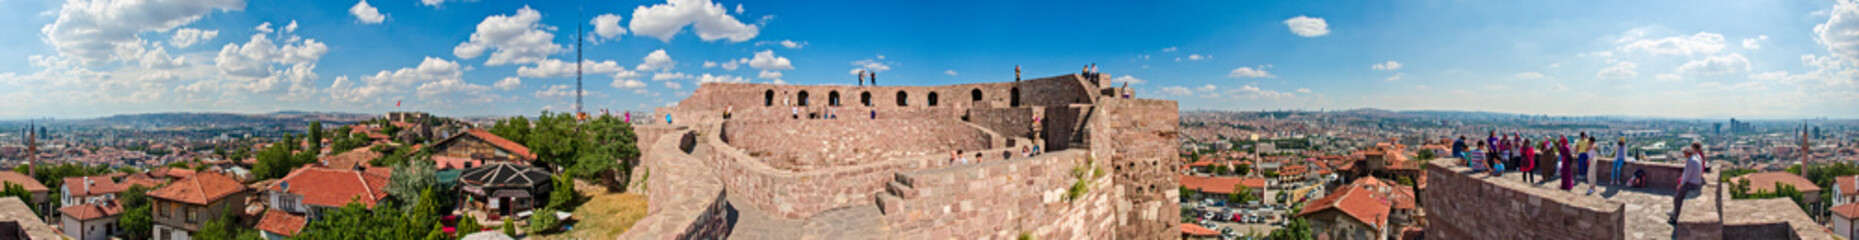 Fototapeta na wymiar Panoramic view of Ankara Castle (Kalesi). It is a fortification from the late antique / early medieval era in Ankara, Turkey. 360 degree view of the capital of Turkey. Tourists on the walls of the man